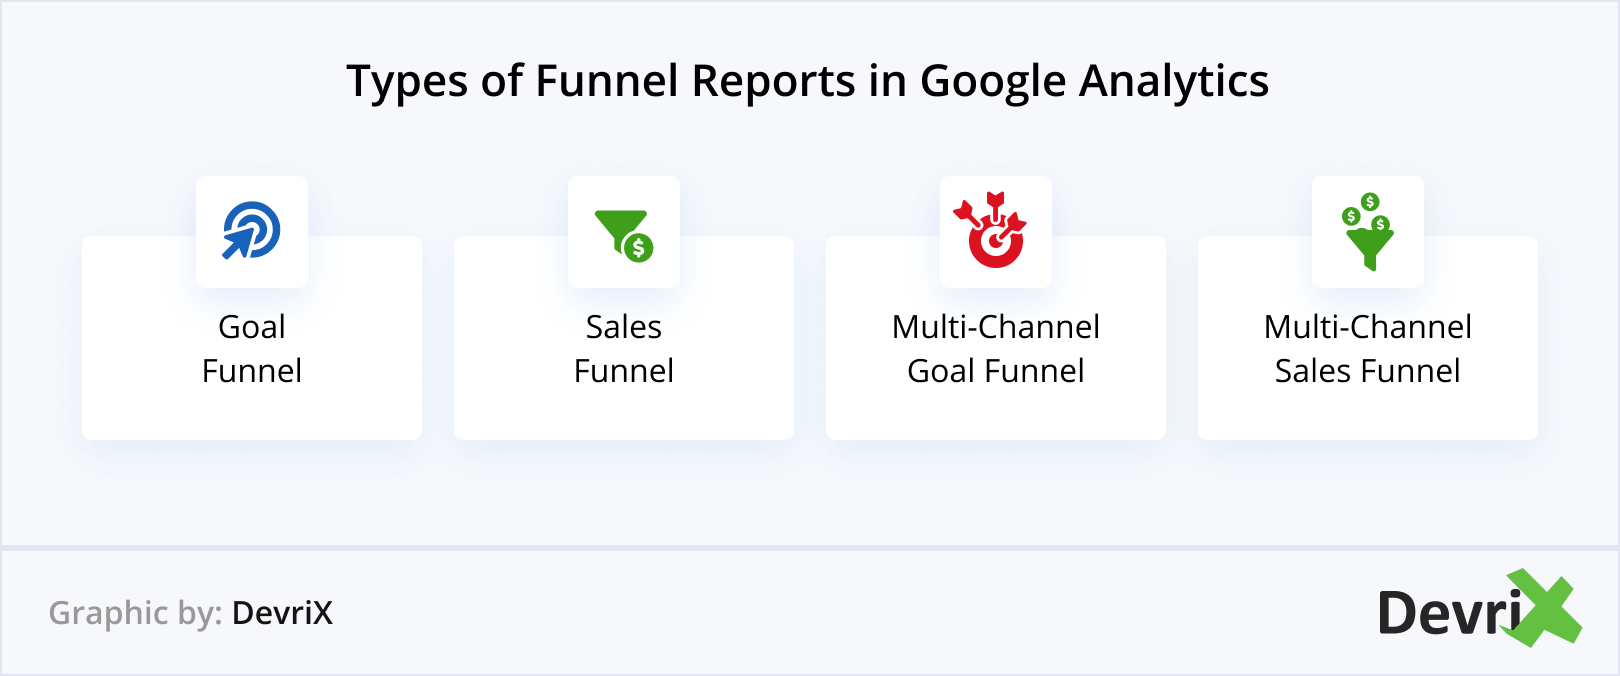 Types of Funnel Reports in Google Analytics